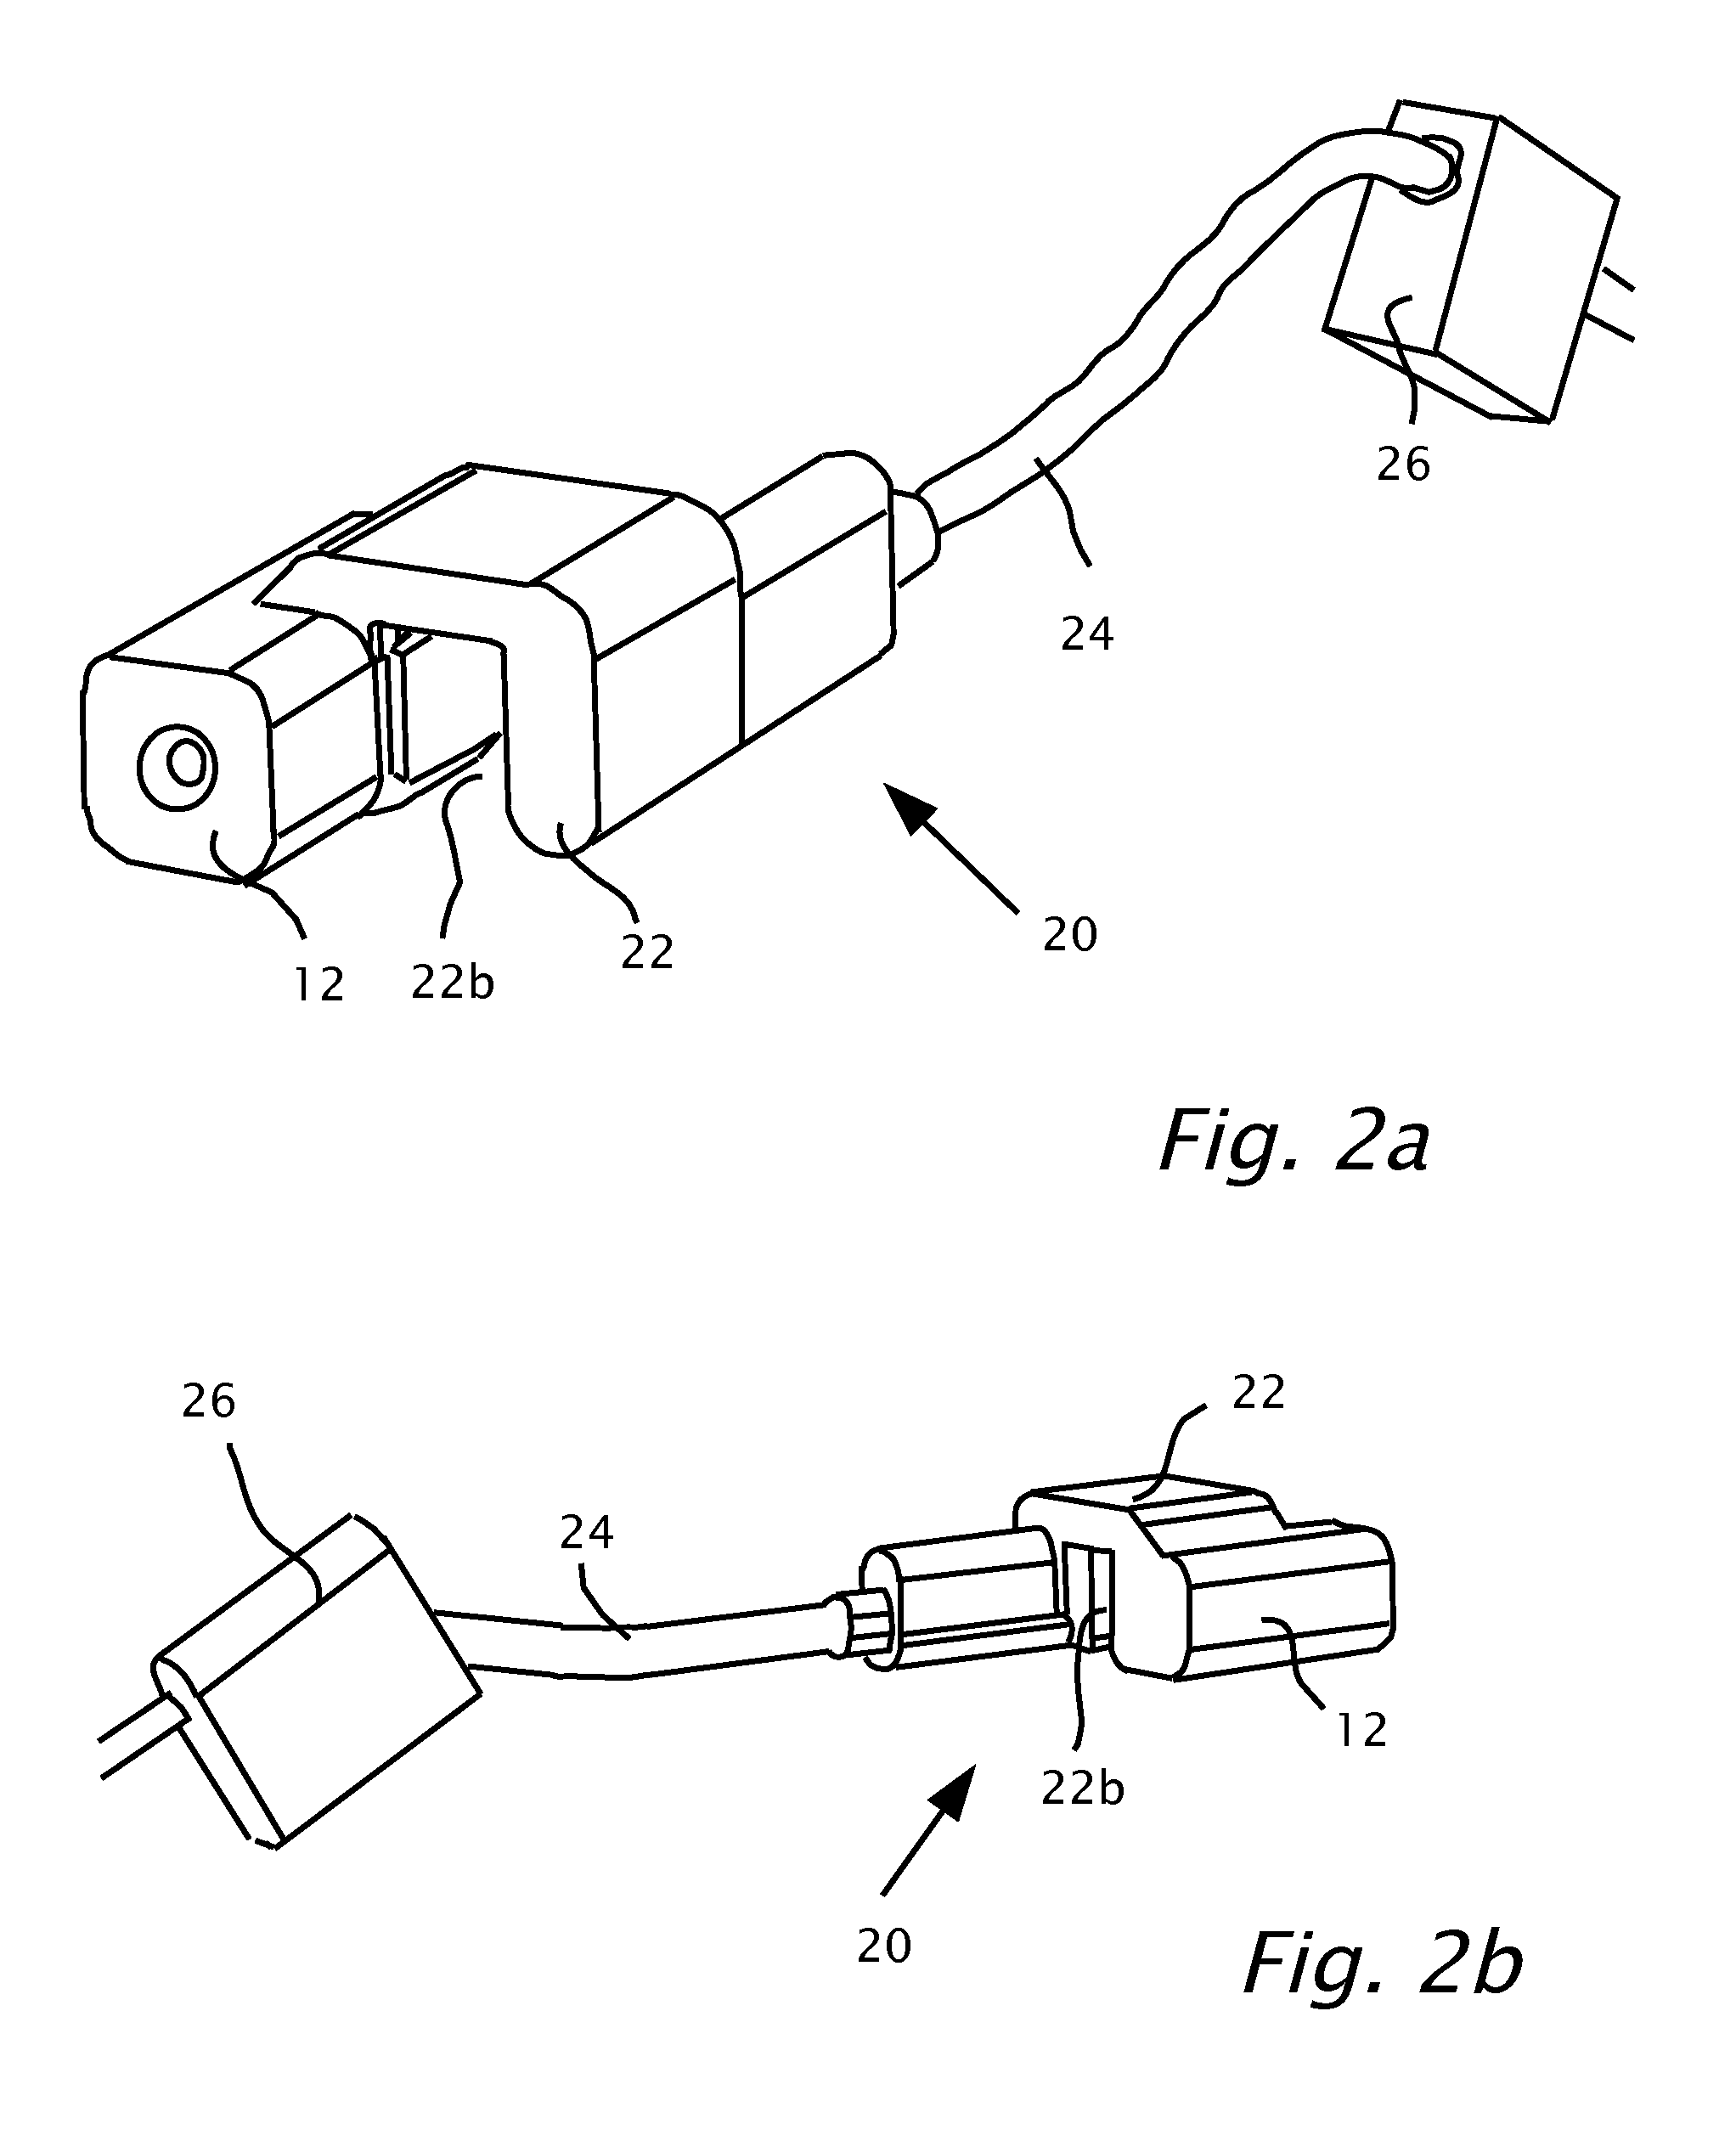 User wearable visual assistance system